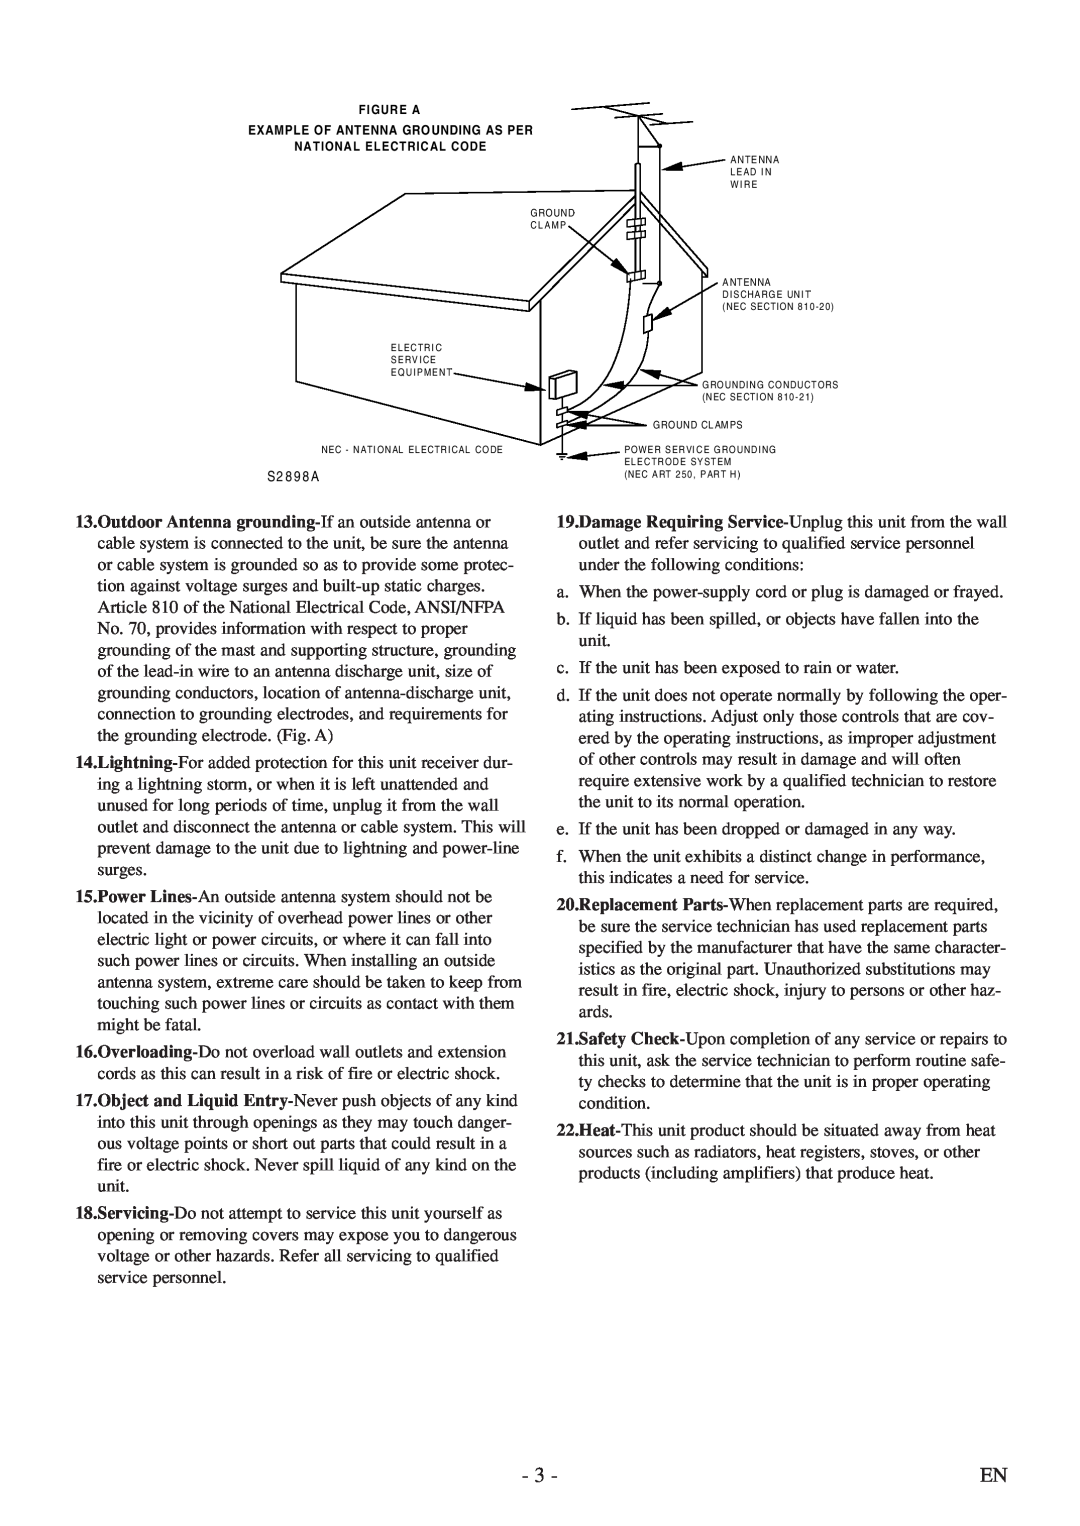 Sylvania 6520FDF owner manual a. When the power-supply cord or plug is damaged or frayed 